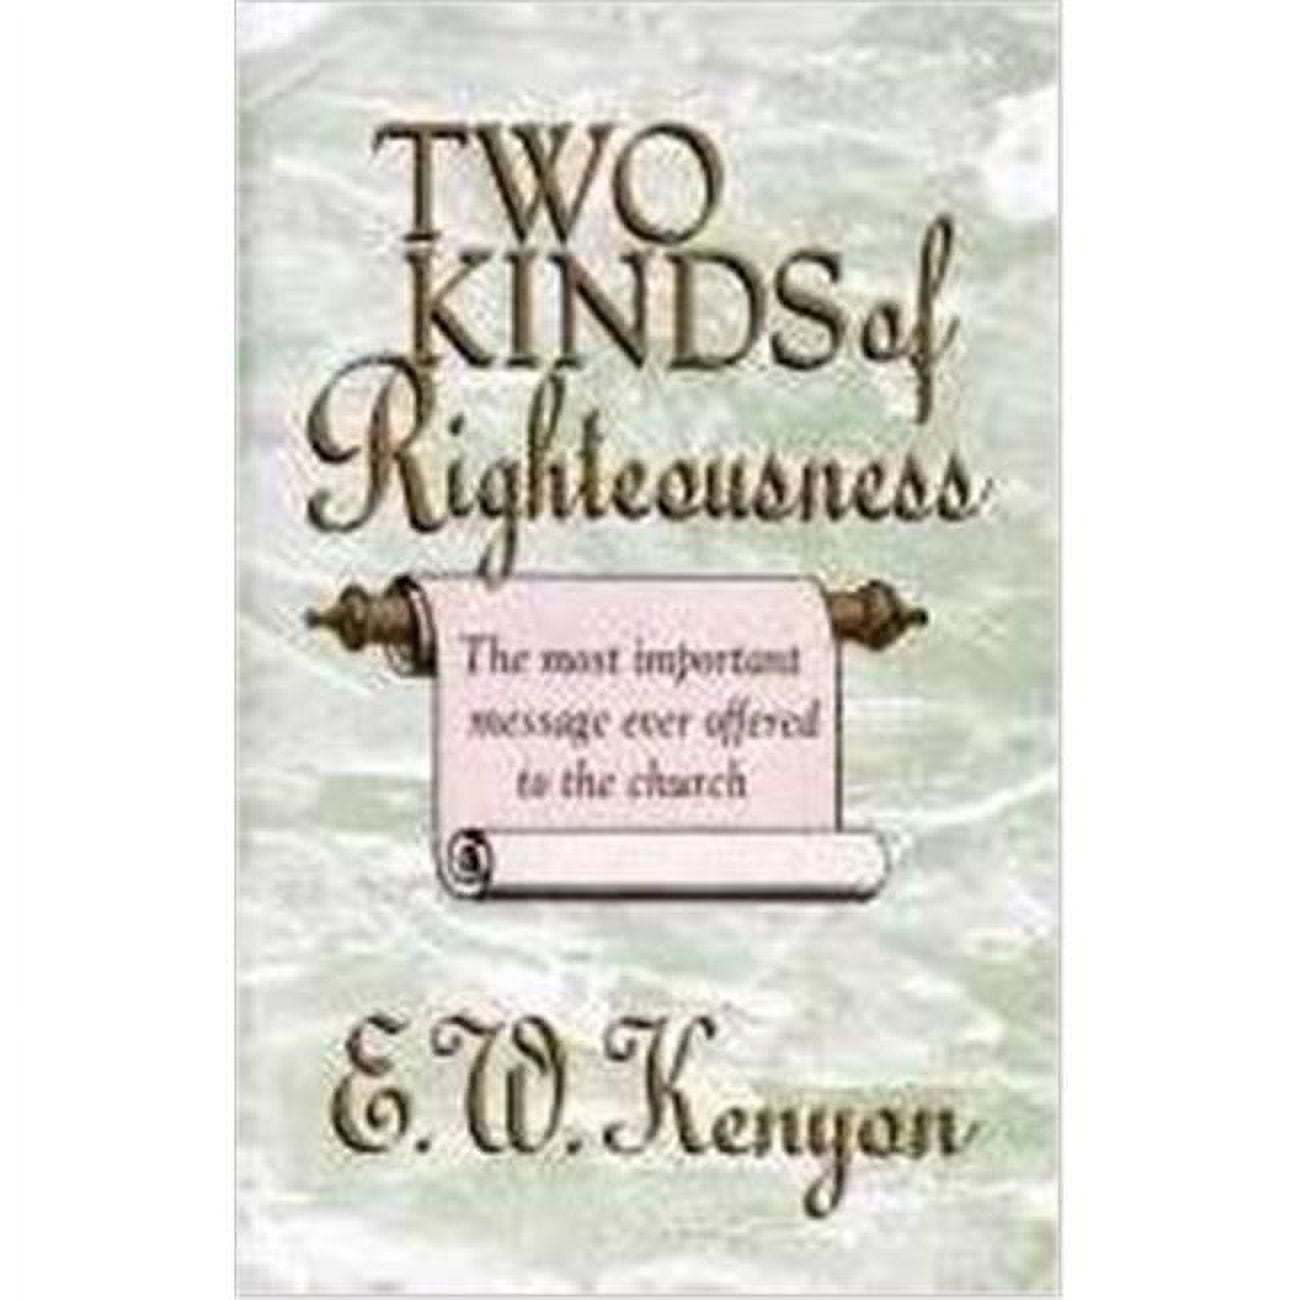 770403 Audiobook-audio Cd-two Kinds Of Righteousness - 3 Cds